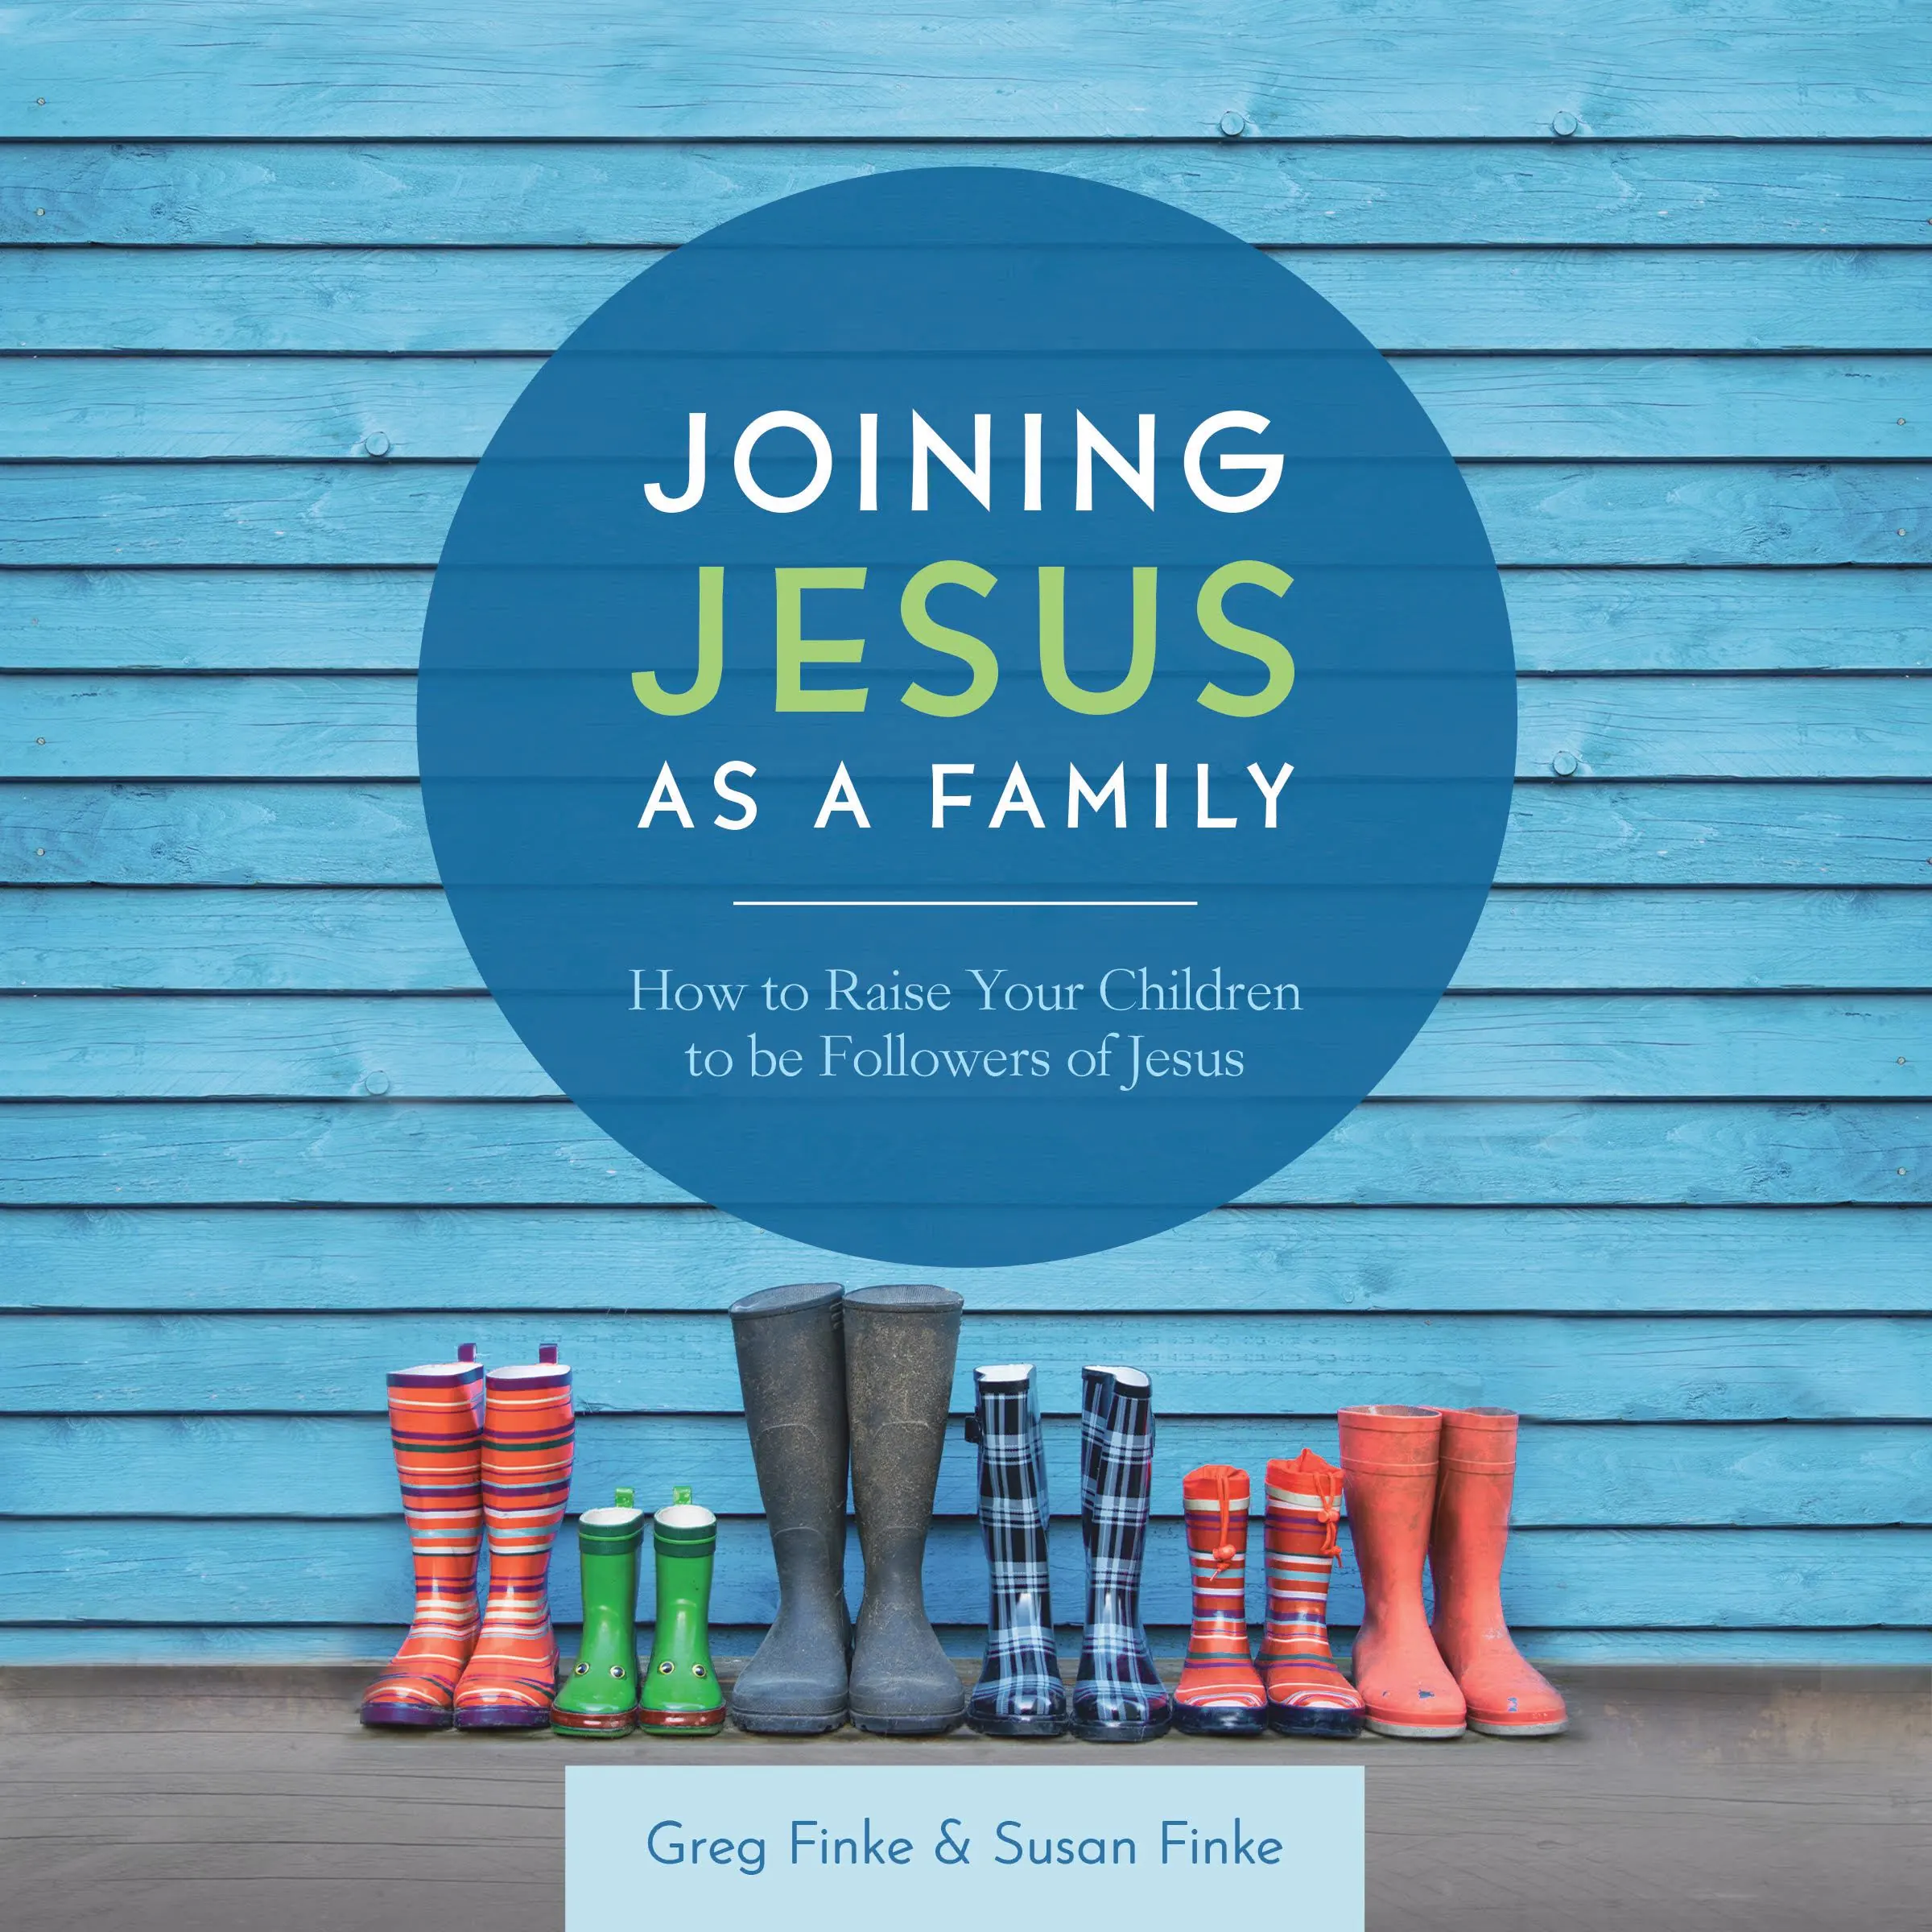 Joining Jesus As A Family Audiobook by Susan Finke